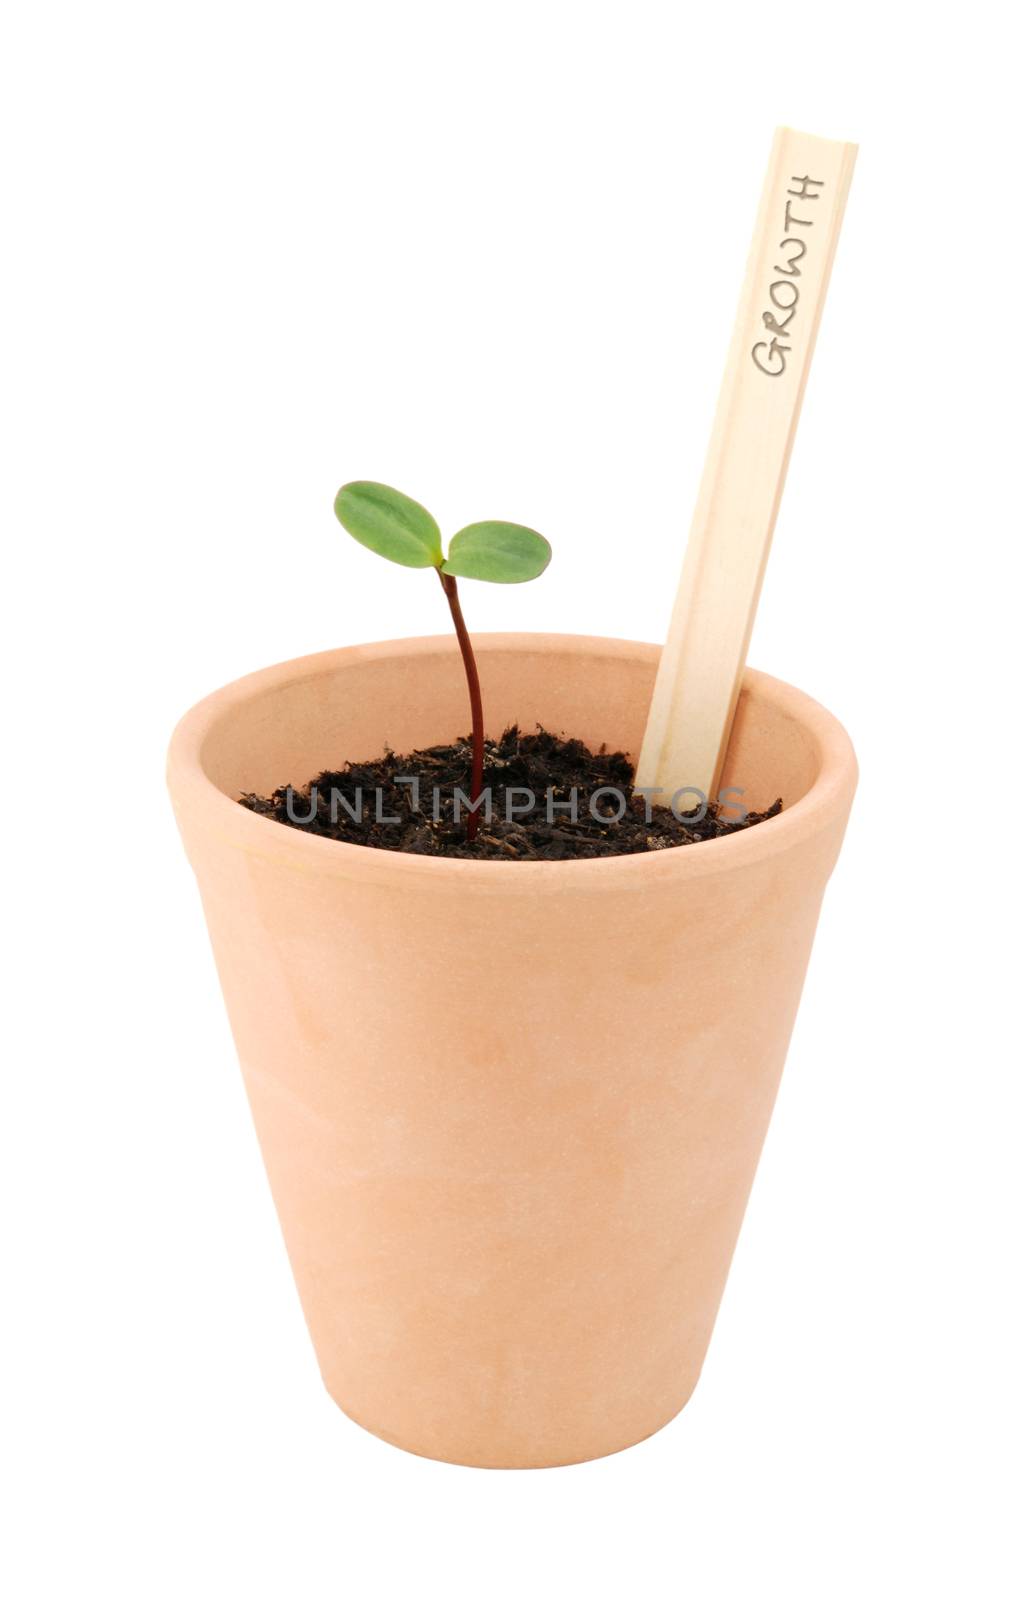 Seedling growing in a terracotta pot, labelled as growth - isolated on a white background